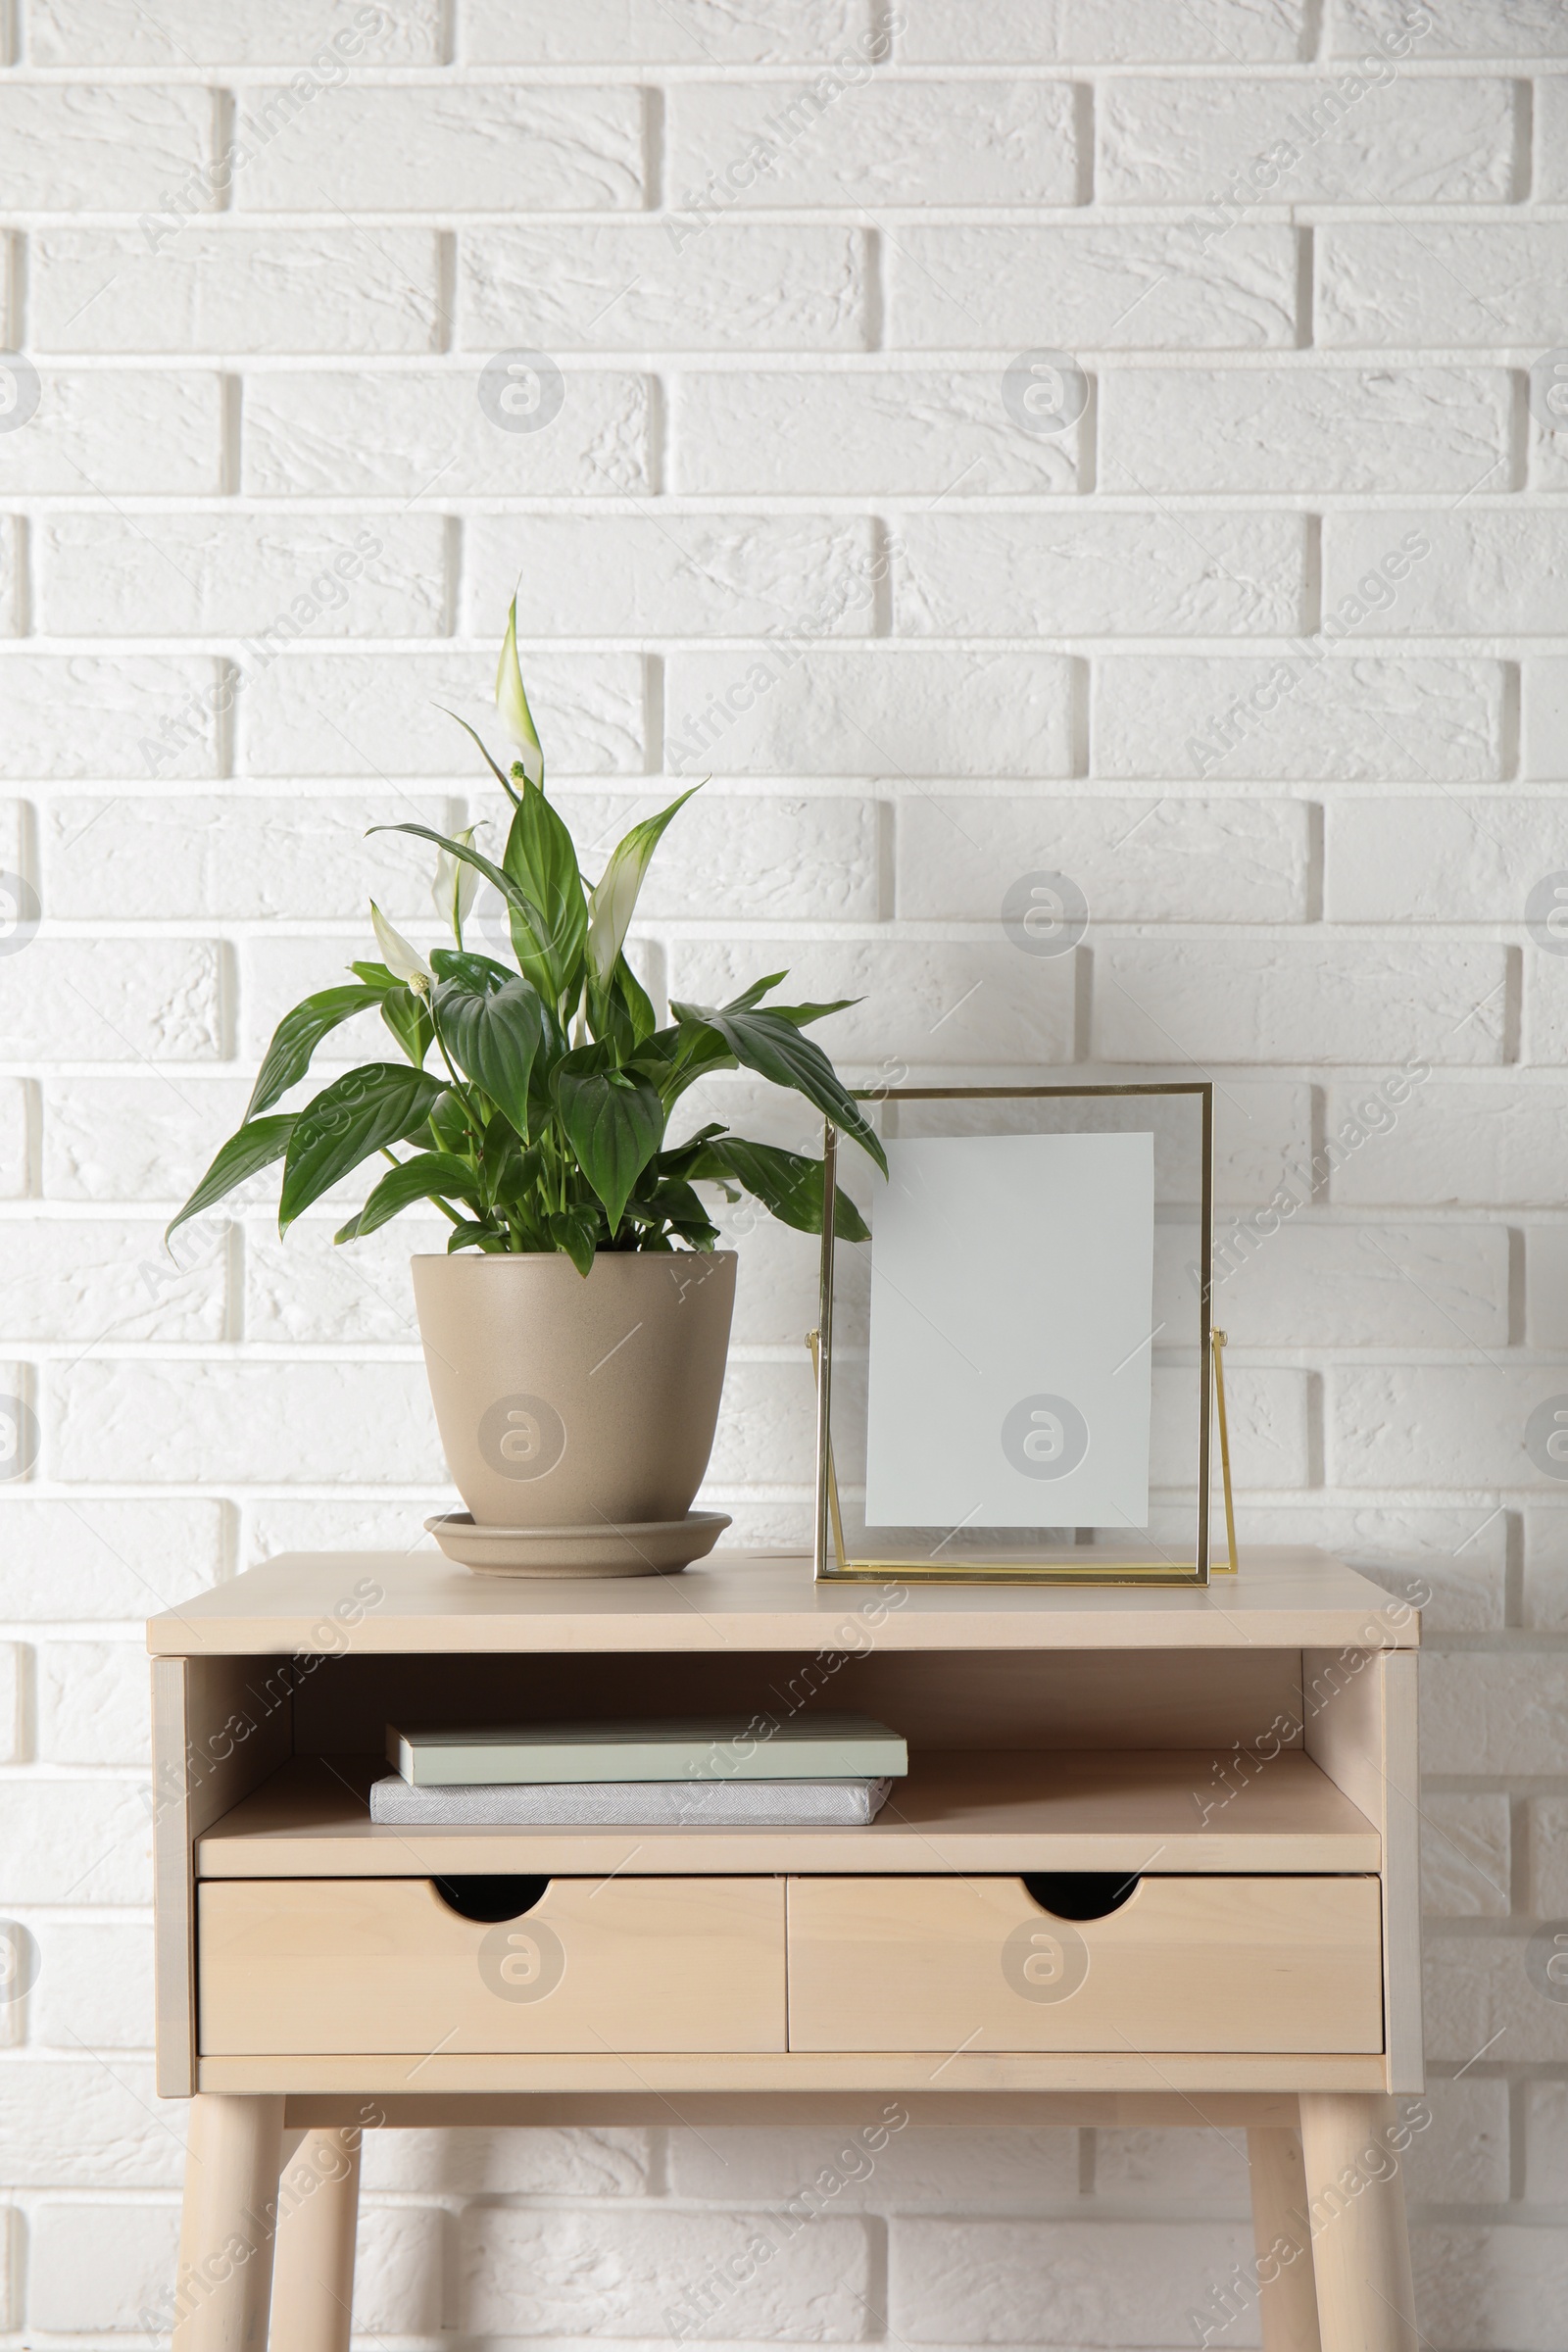 Photo of Spathiphyllum plant in pot and photo frame on table near brick wall, space for text. Home decor